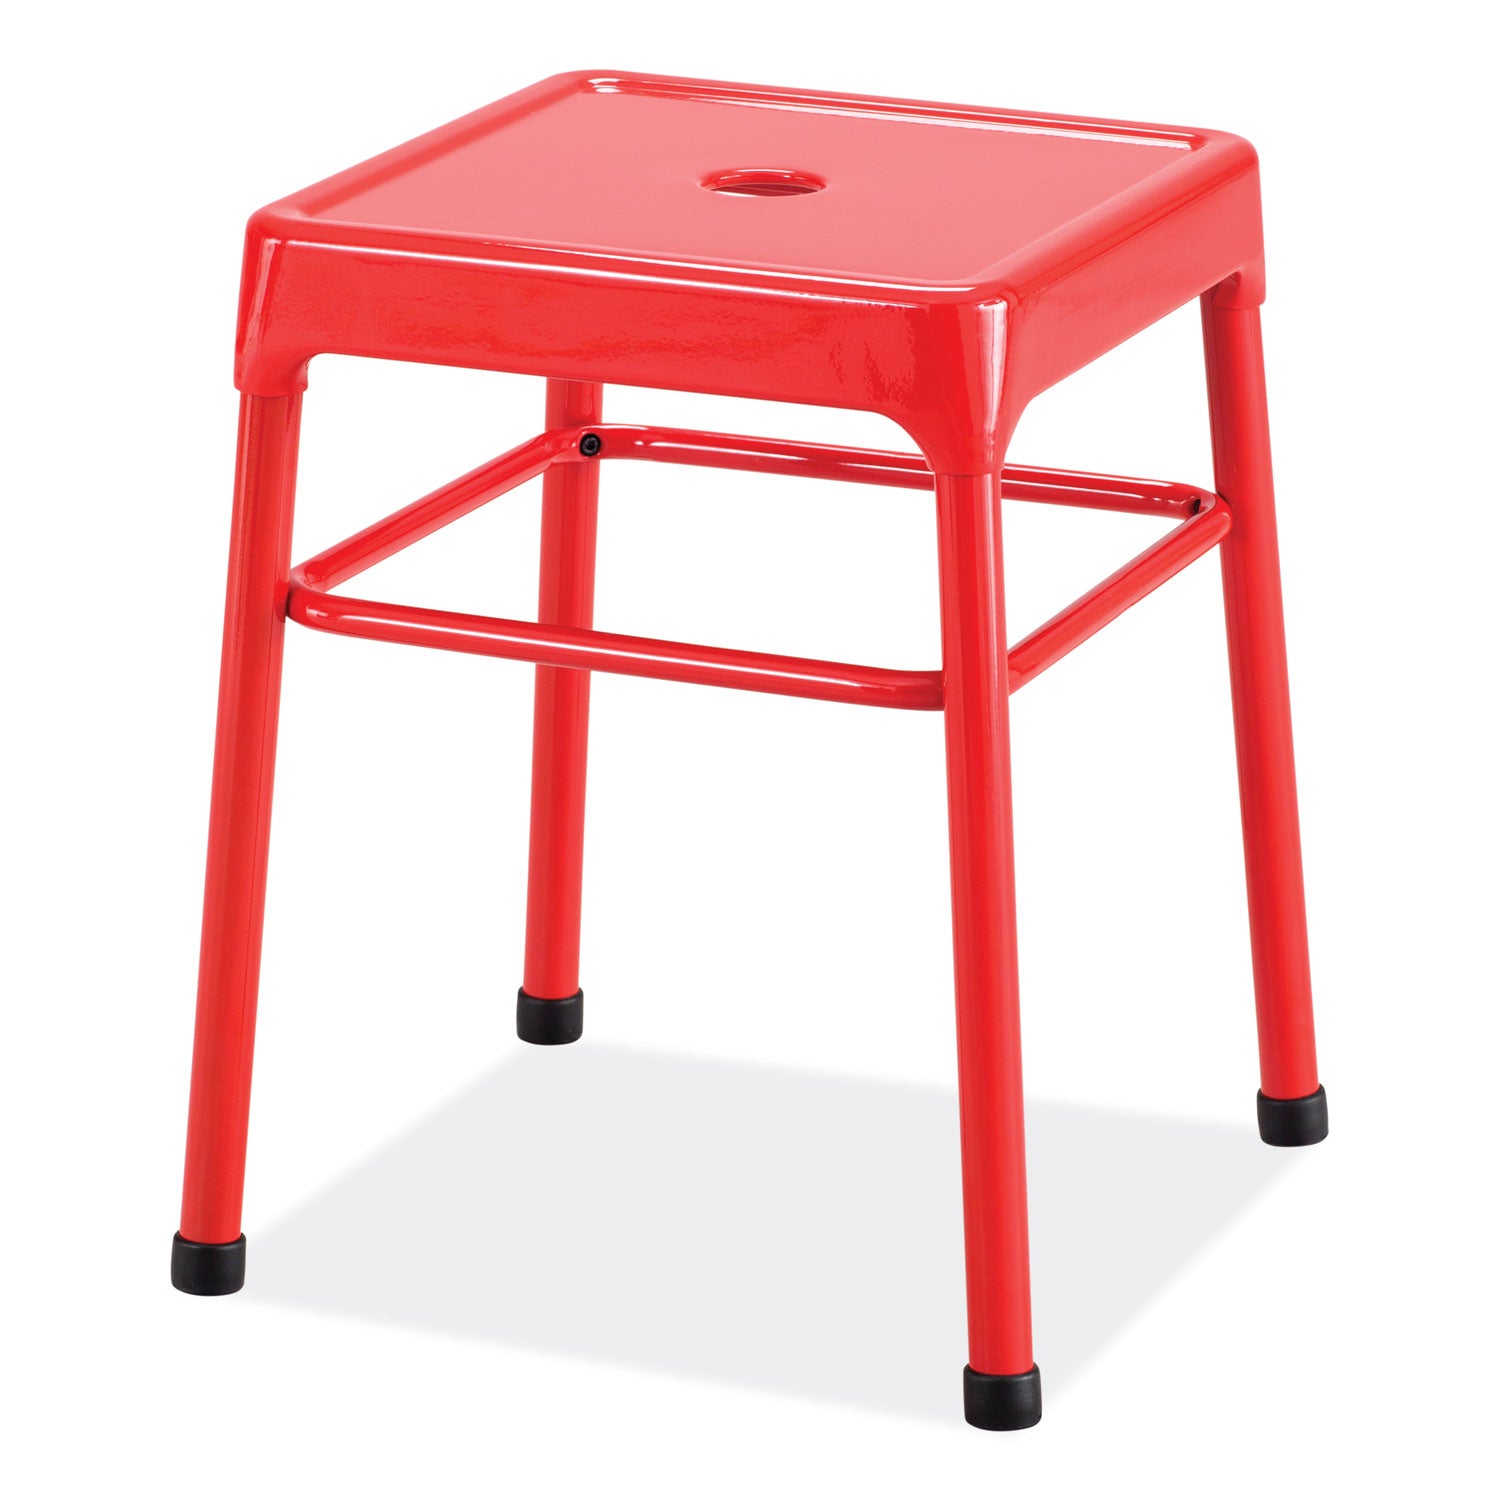 steel-guestbistro-stool-backless-supports-up-to-250-lb-18-seat-height-red-seat-red-base-ships-in-1-3-business-days_saf6604rd - 4